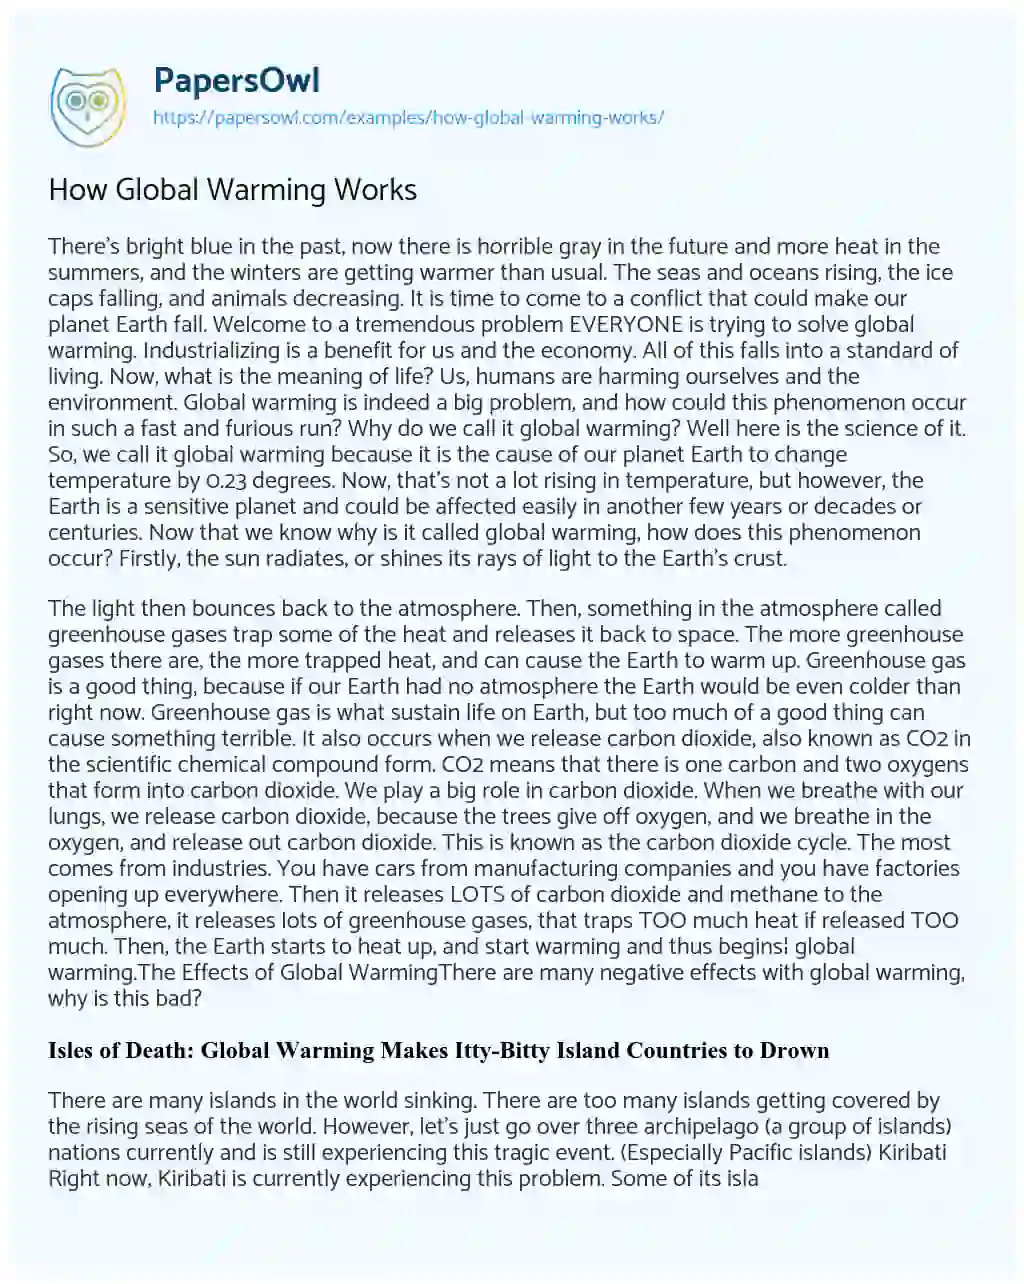 Essay on How Global Warming Works